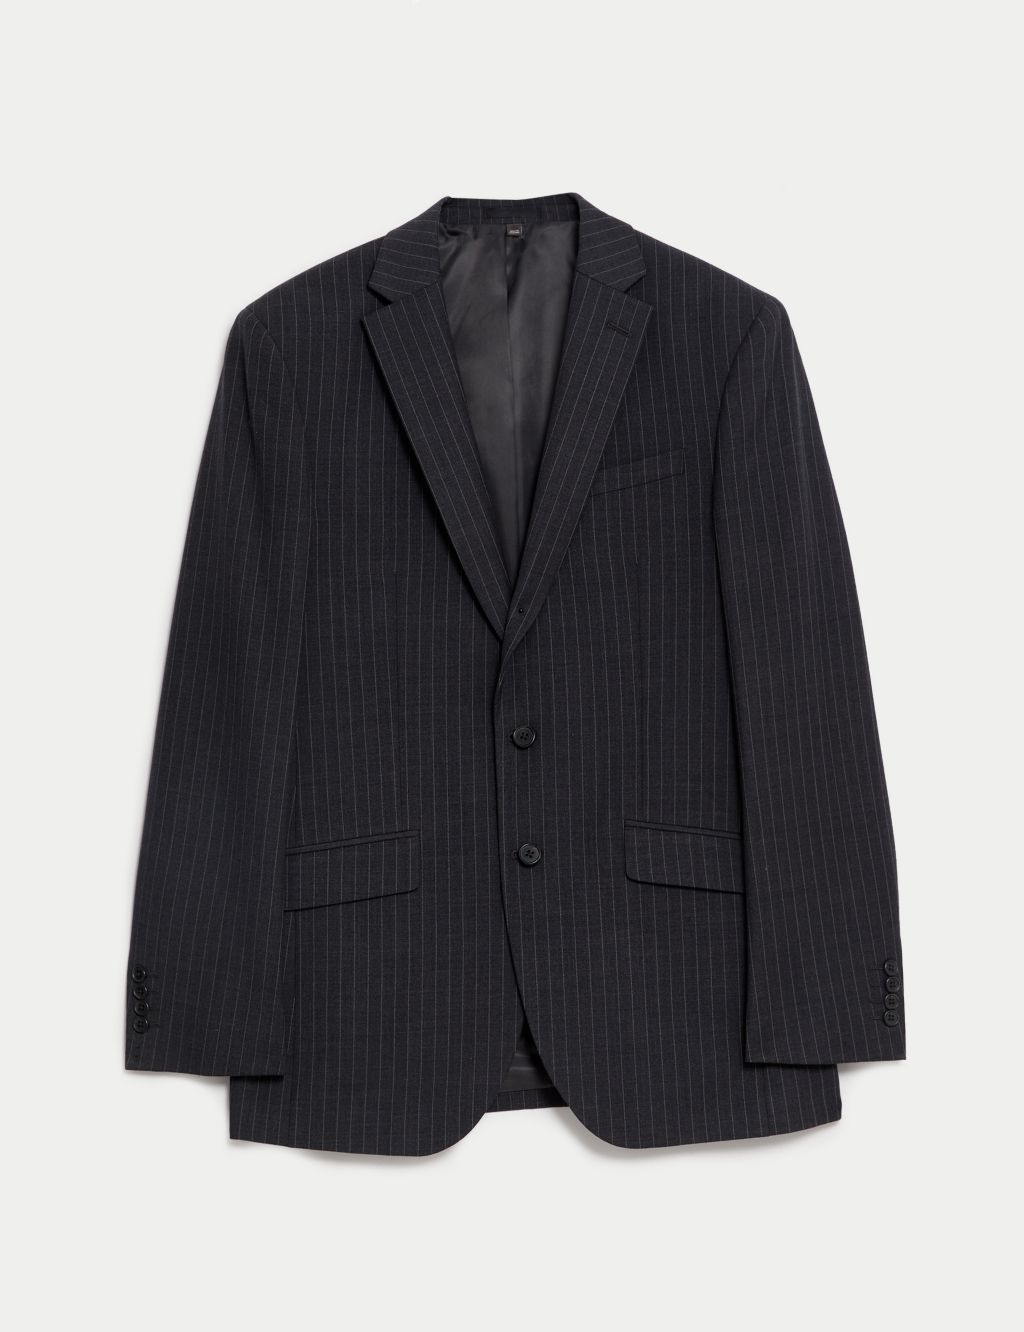 The Ultimate Tailored Fit Pinstripe Jacket image 2